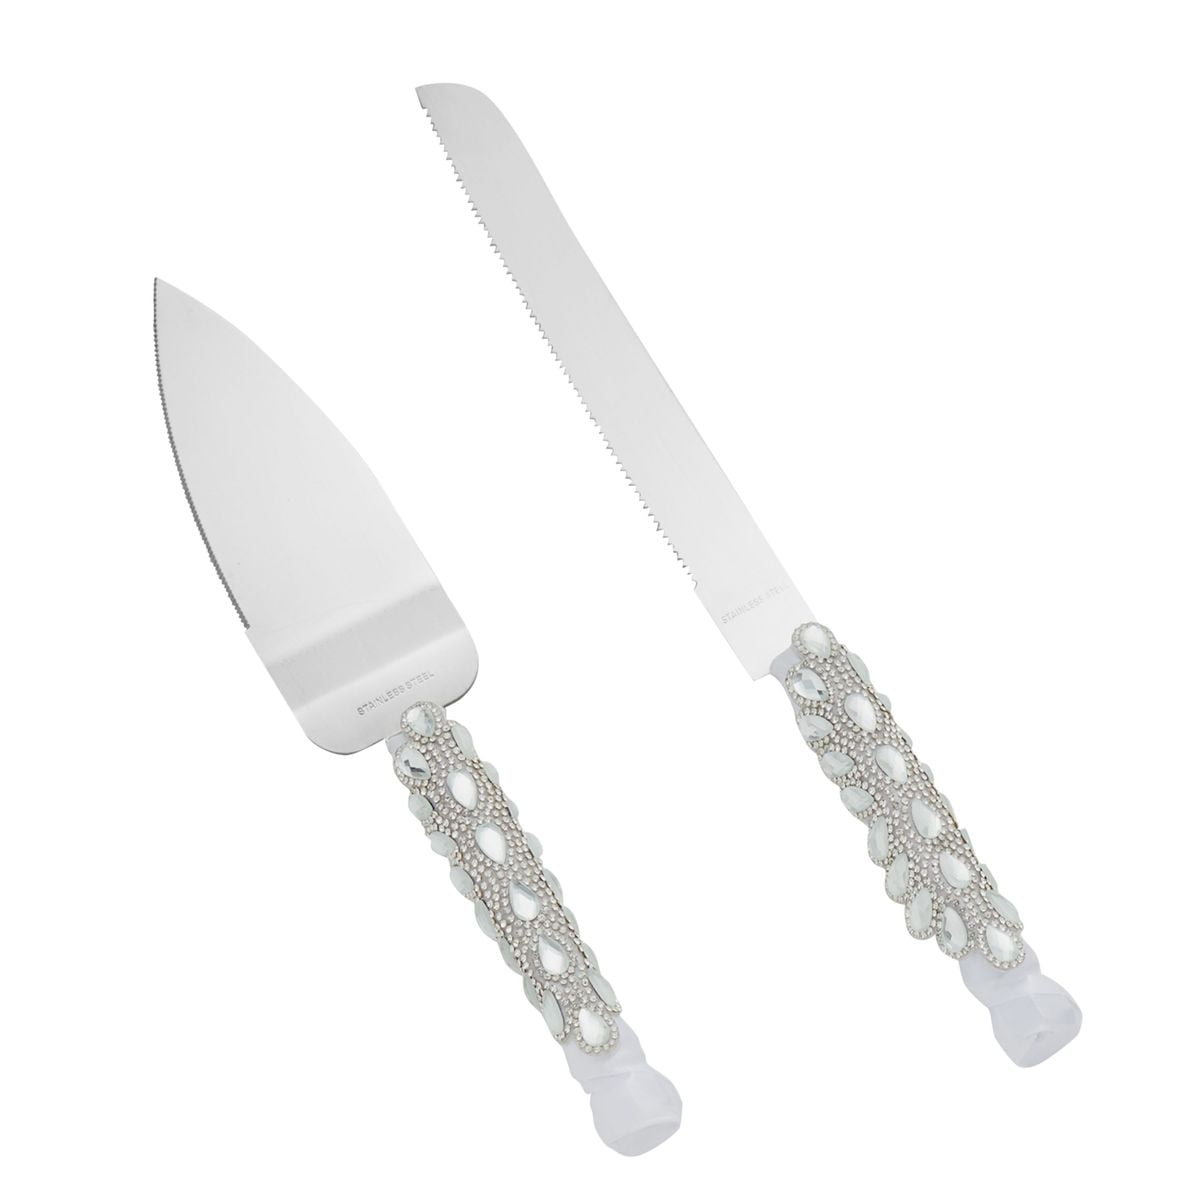 Cake Shovel Wedding Server Stainless Steel Party Handle Cutter Acrylic Blade S 